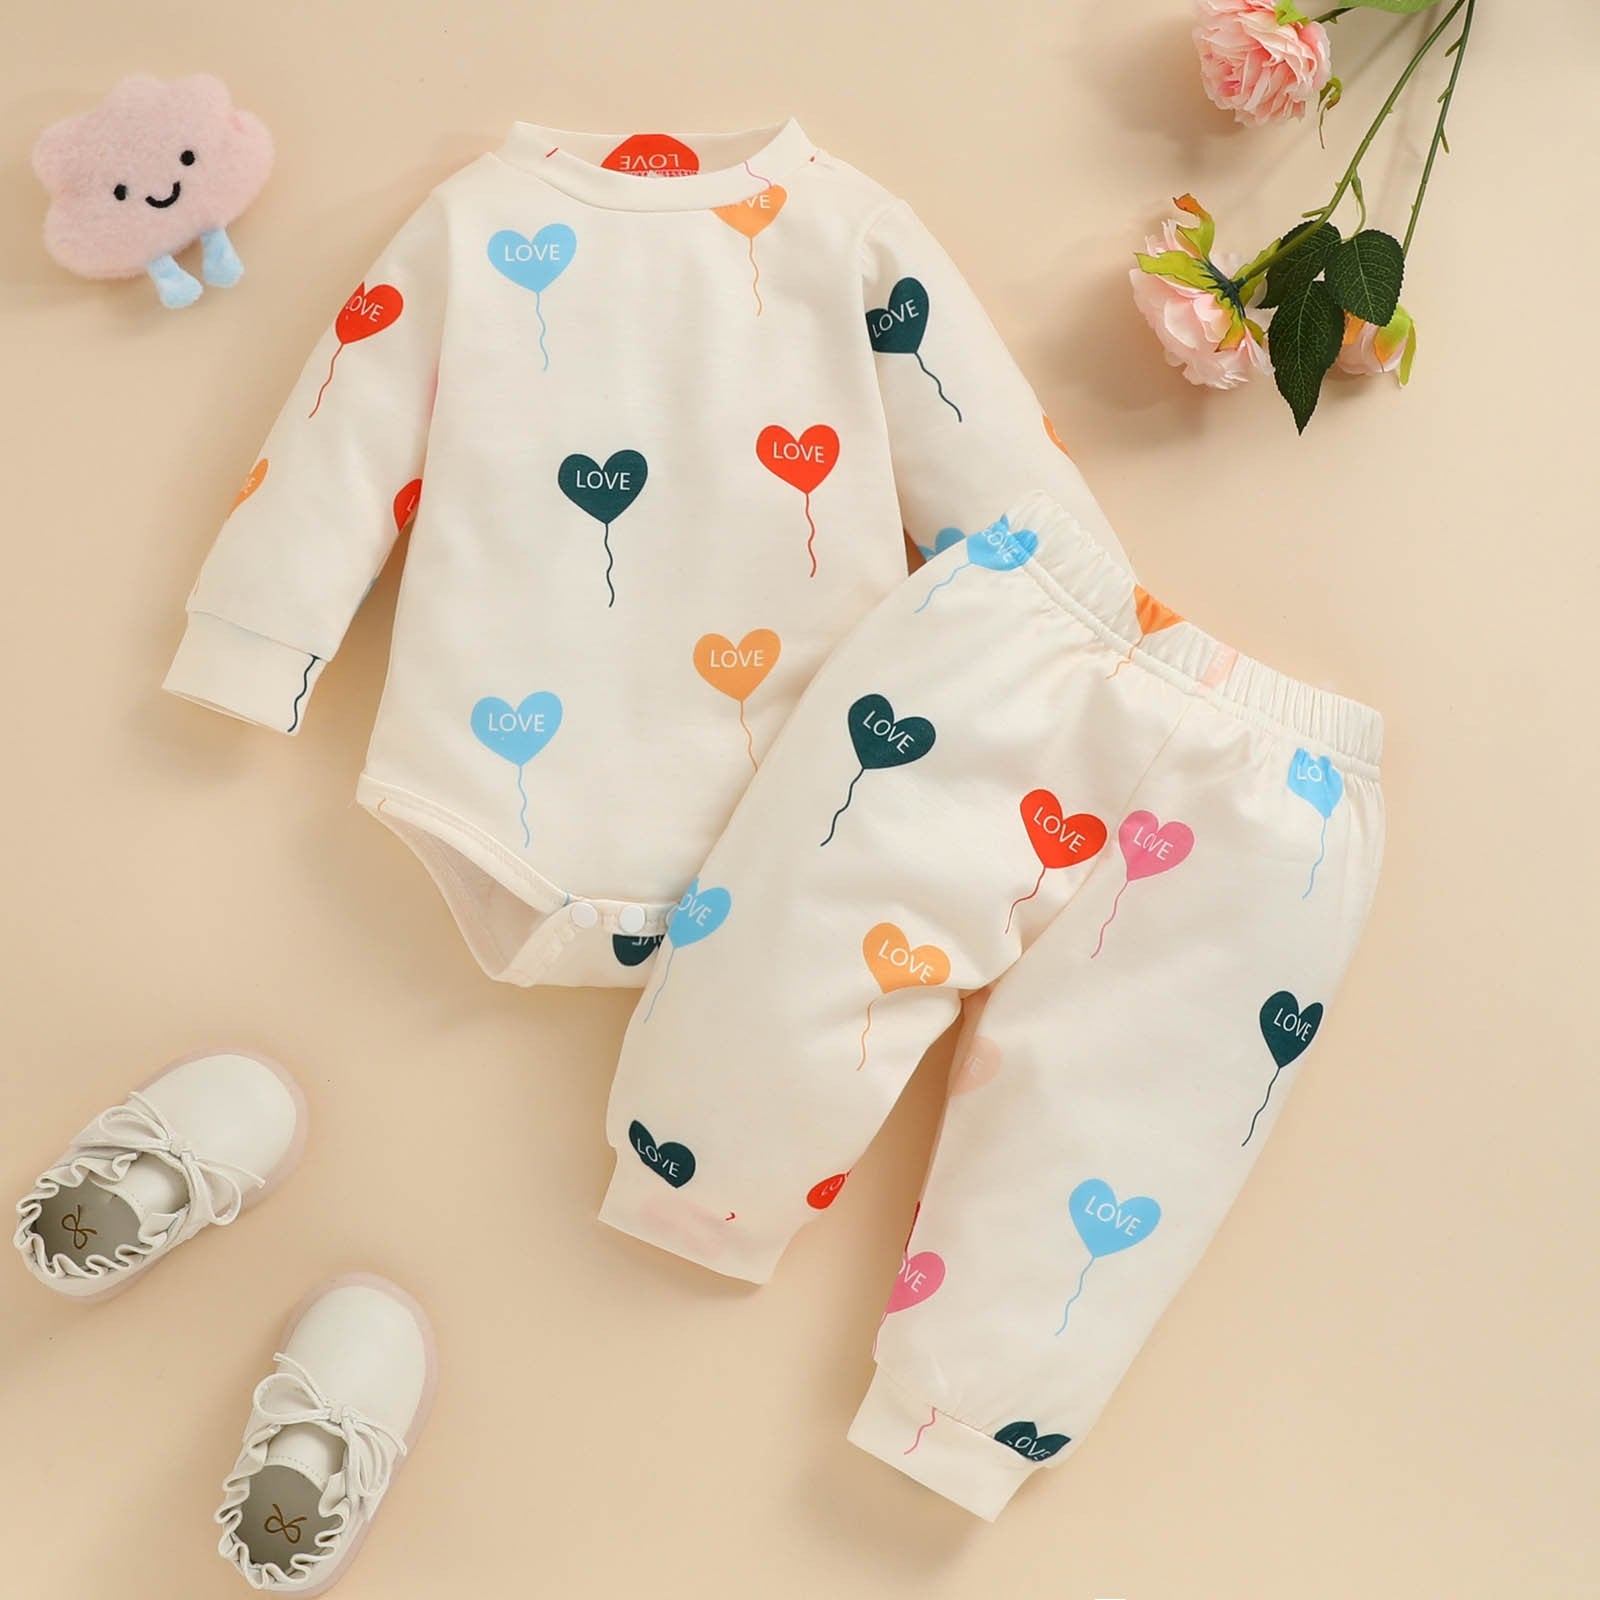 Adorable Valentine's Day Outfits for Newborn Boys and Girls